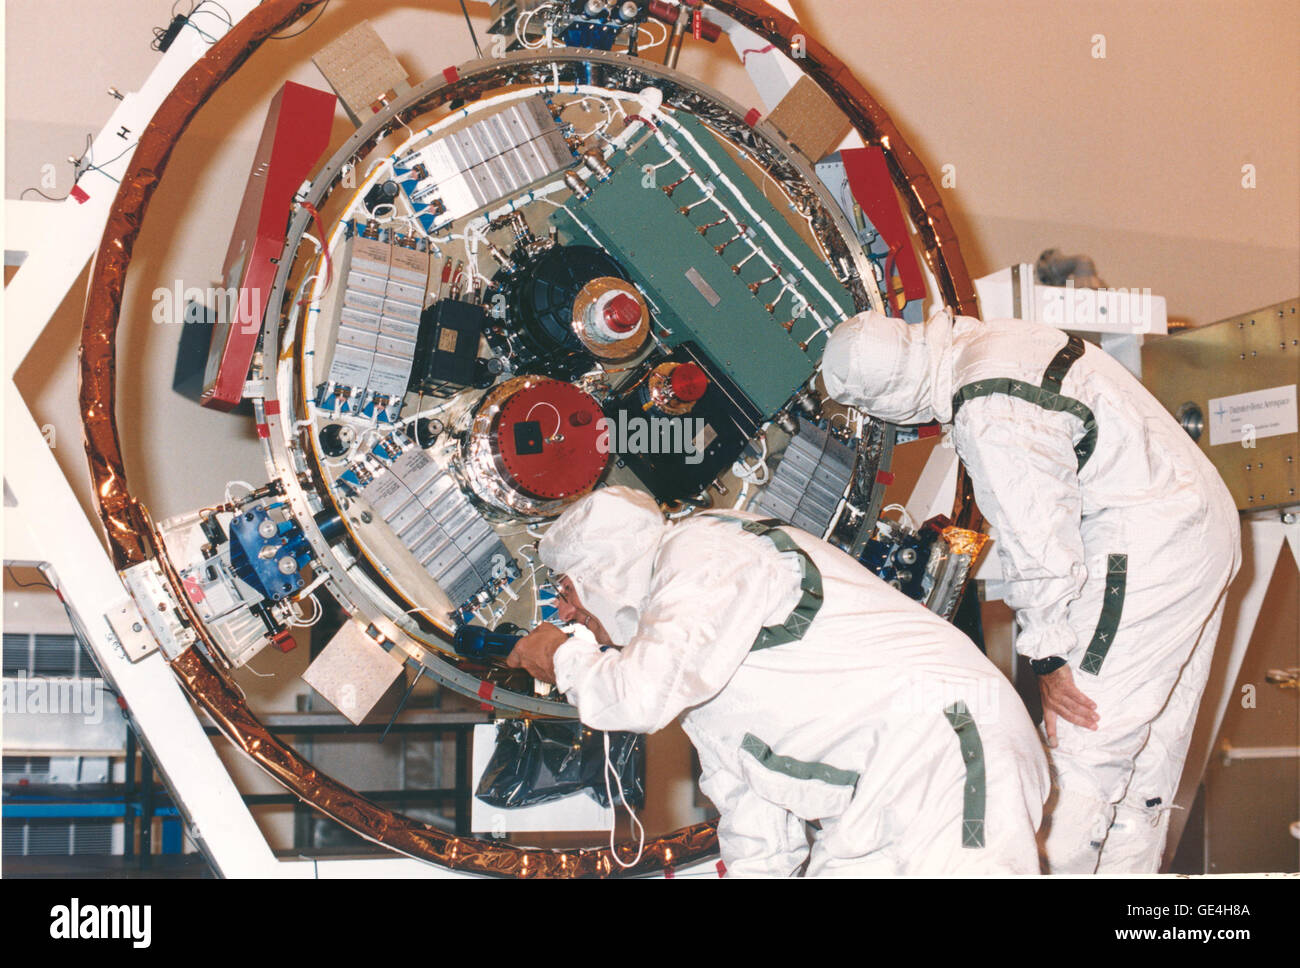 (September 10, 1997) Jet Propulsion Laboratory (JPL) workers examine the Huygens probe after removal from the Cassini spacecraft in the Payload Hazardous Servicing Facility (PHSF) at KSC. The spacecraft was returned to the PHSF after damage to the thermal insulation was discovered inside Huygens from an abnormally high flow of conditioned air. The damage required technicians to inspect the inside of the probe, repair the insulation, and clean the instruments.   After returning from the PHSF to Launch Pad 40 at Cape Canaveral Air Station, Cassini/Huygens launched successfully in October 1997, a Stock Photo